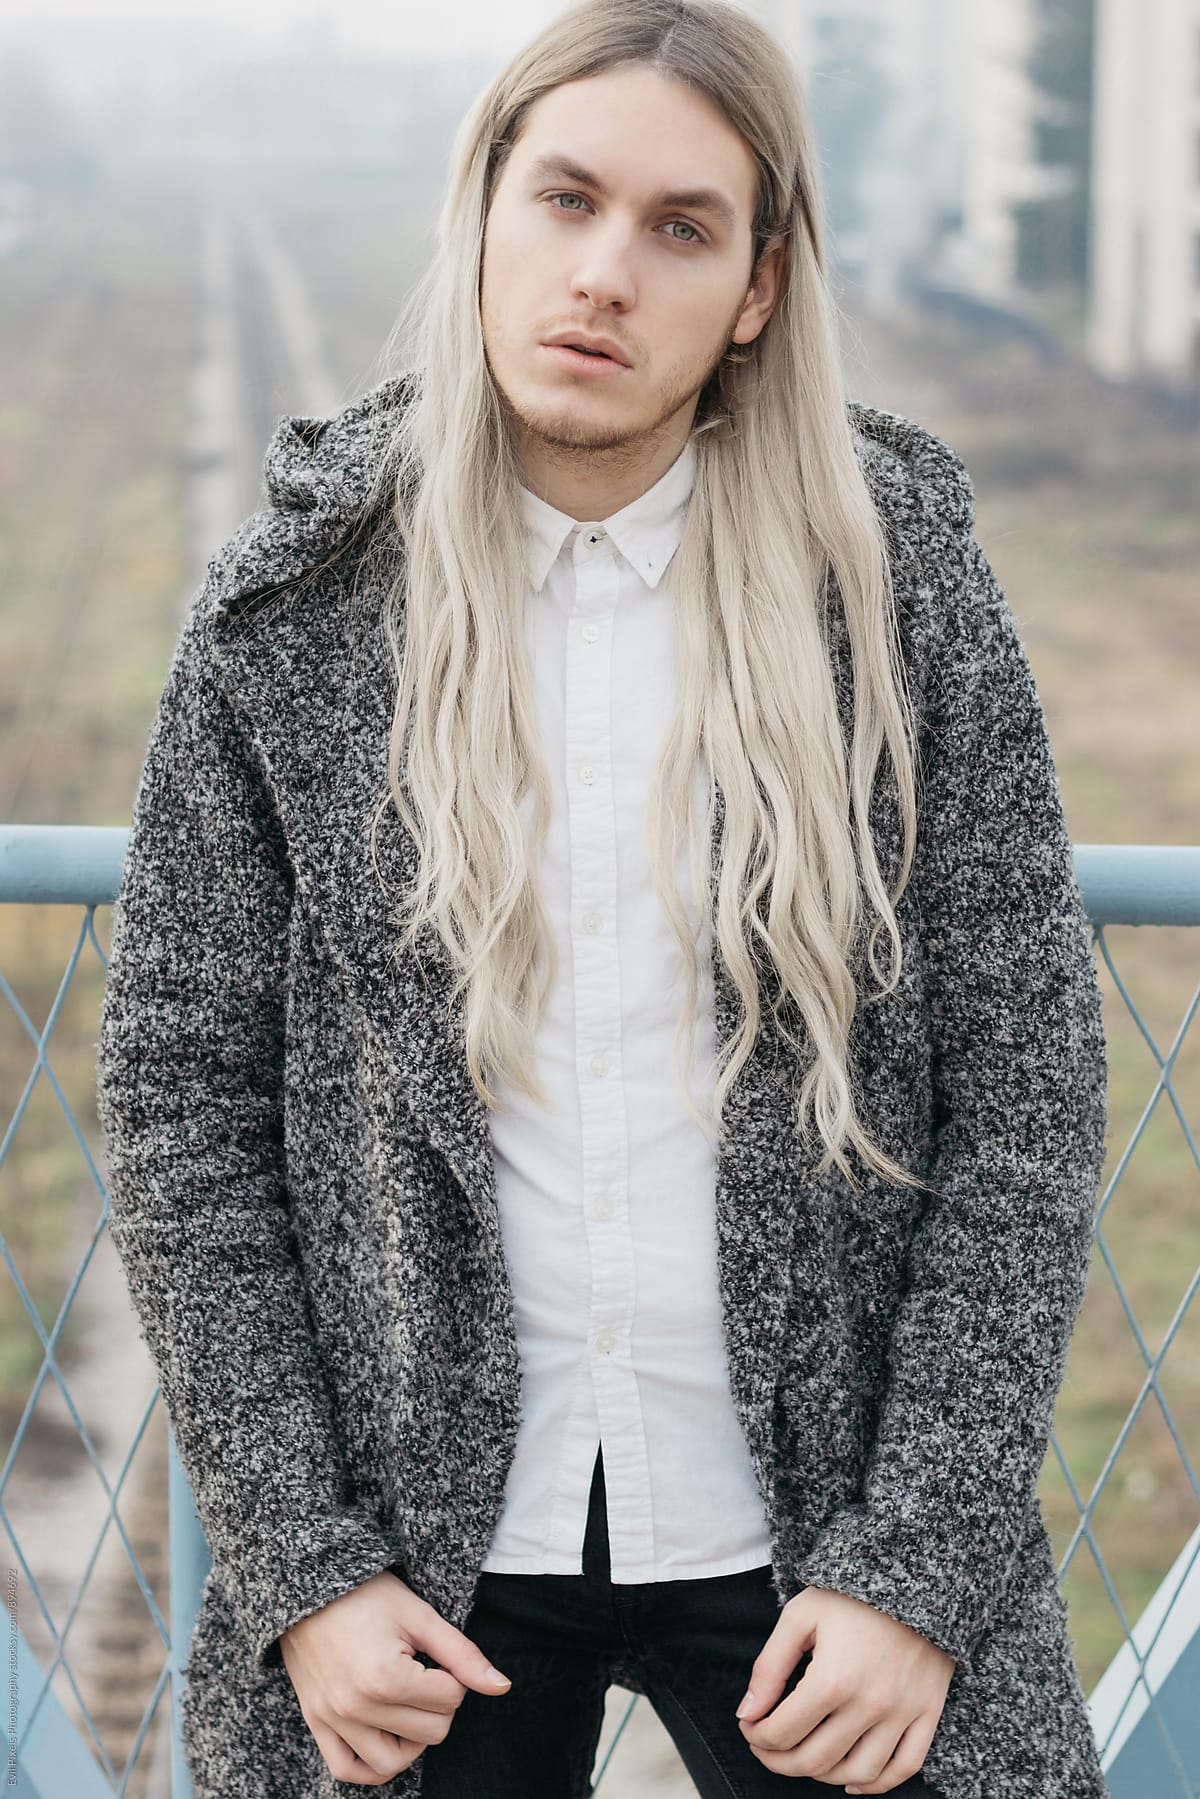 Handsome Male Model With Long Blond Hair By Evil Pixels